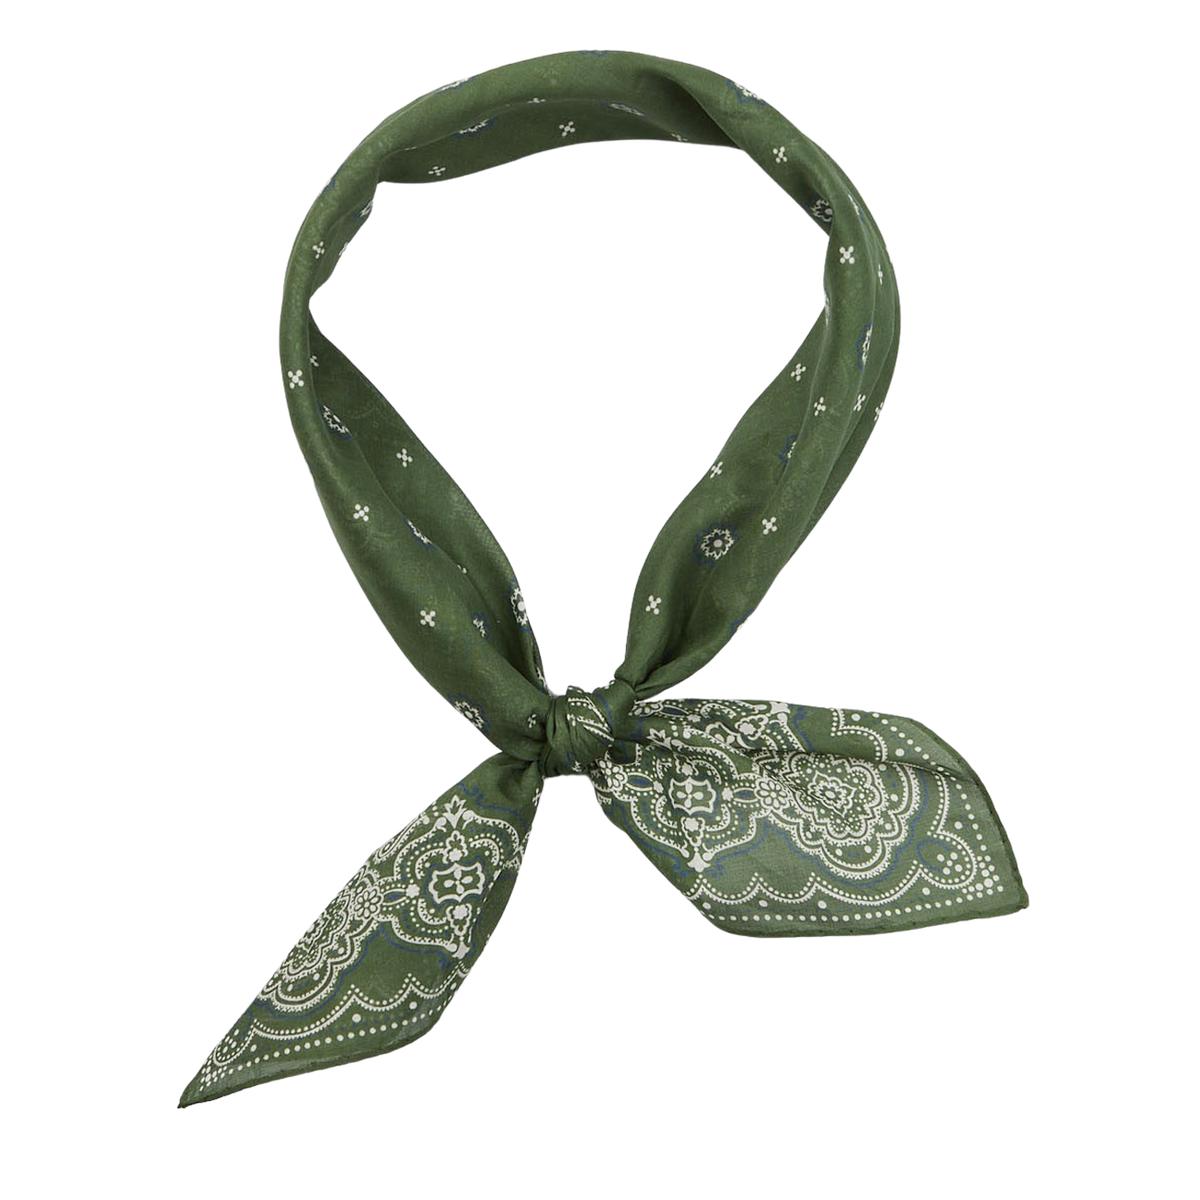 Amanda Christensen Olive Green Medallion Printed Cotton Bandana, tied in a knot against a white background.